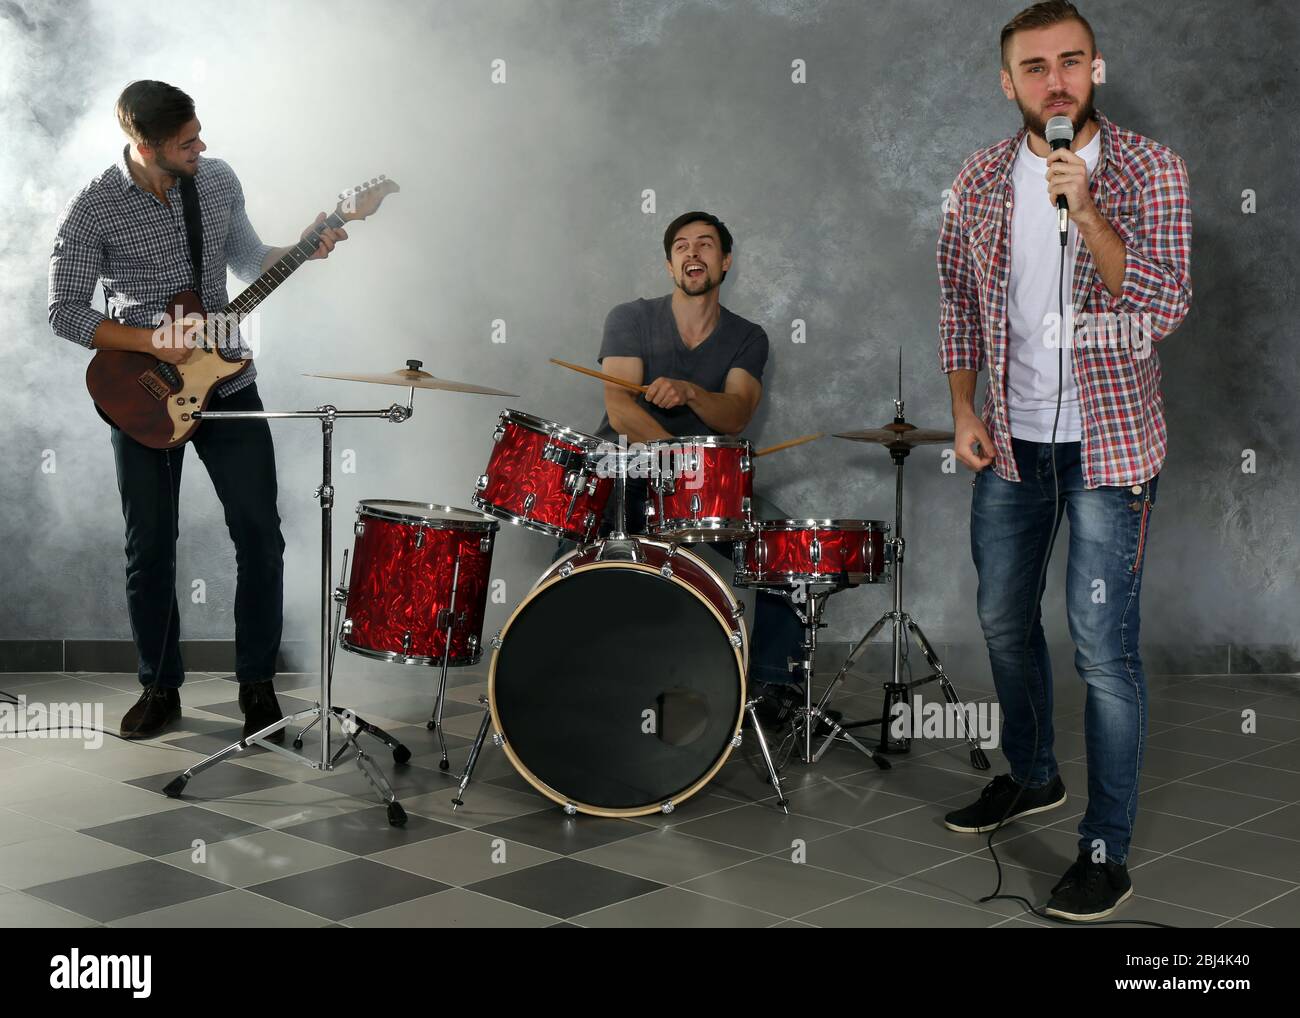 Musicians playing musical instruments and singing songs in a studio Stock Photo